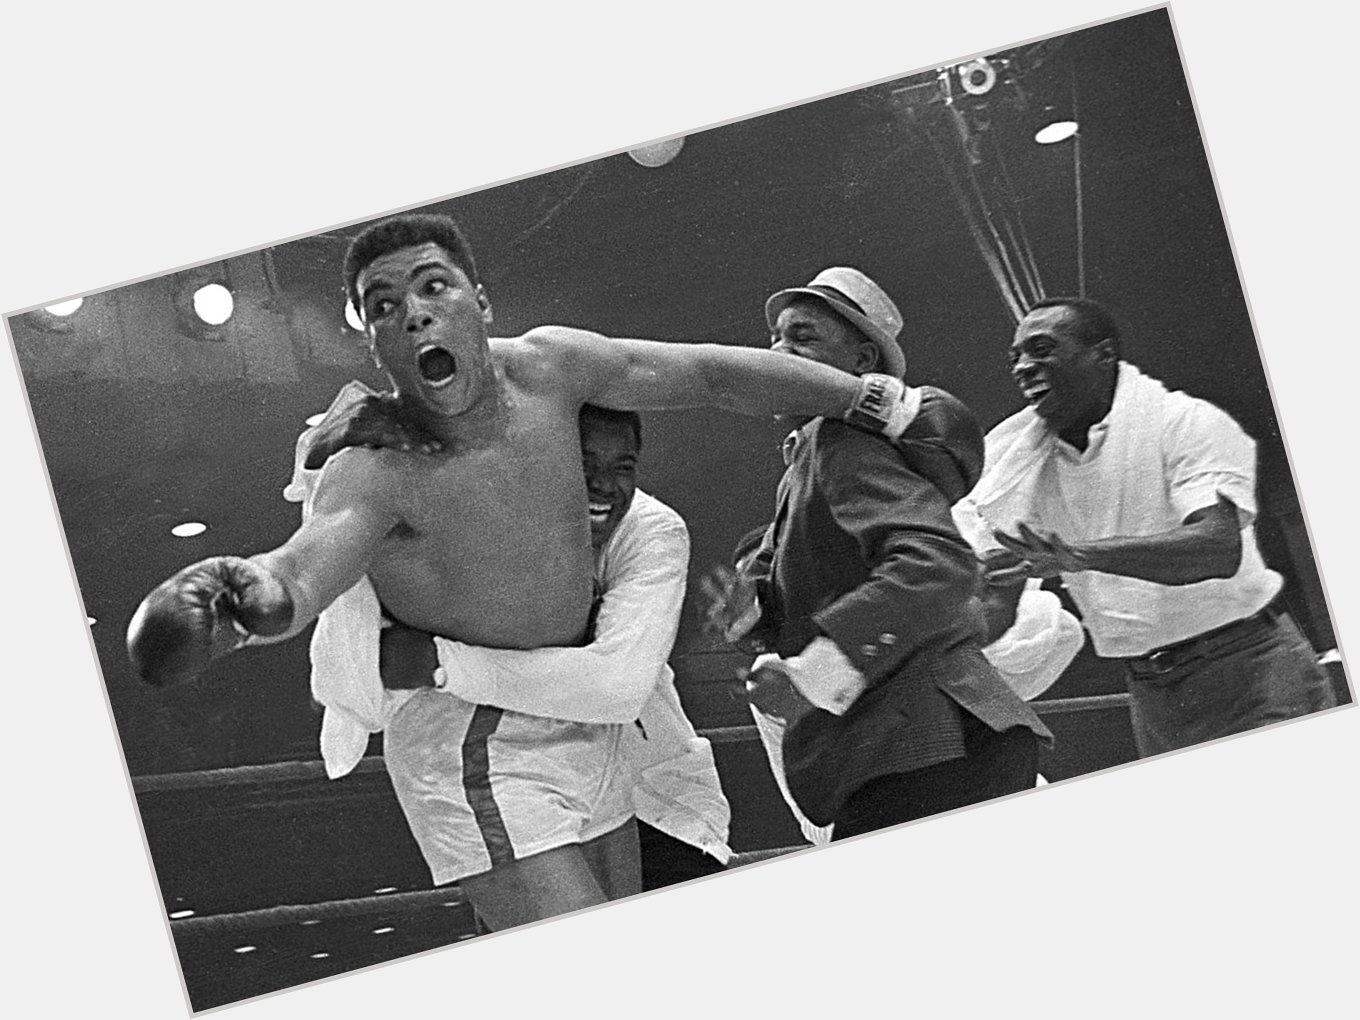 \"Age is whatever you think it is. You are as old as you think you are\" 

Happy birthday to the great Muhammad Ali 